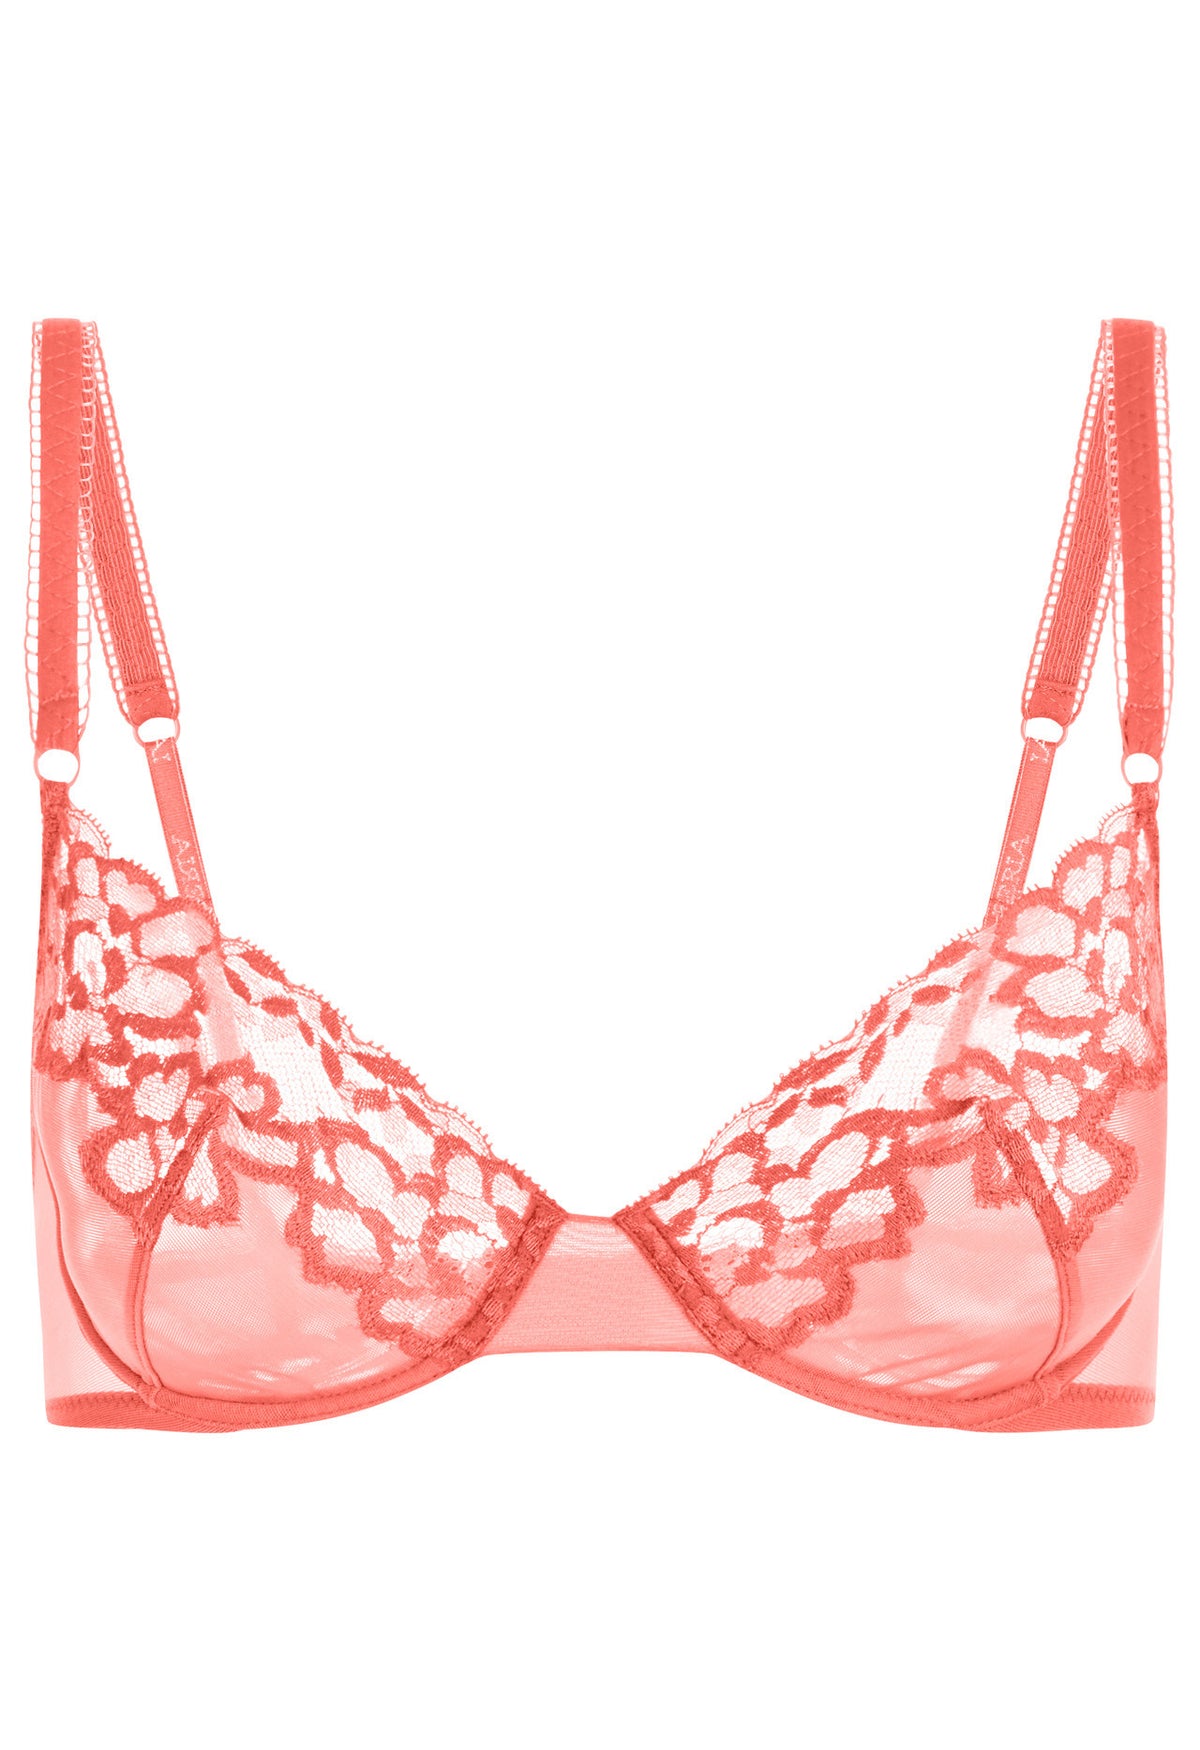 Coral Underwire Bra in Leavers Lace and Stretch Tulle